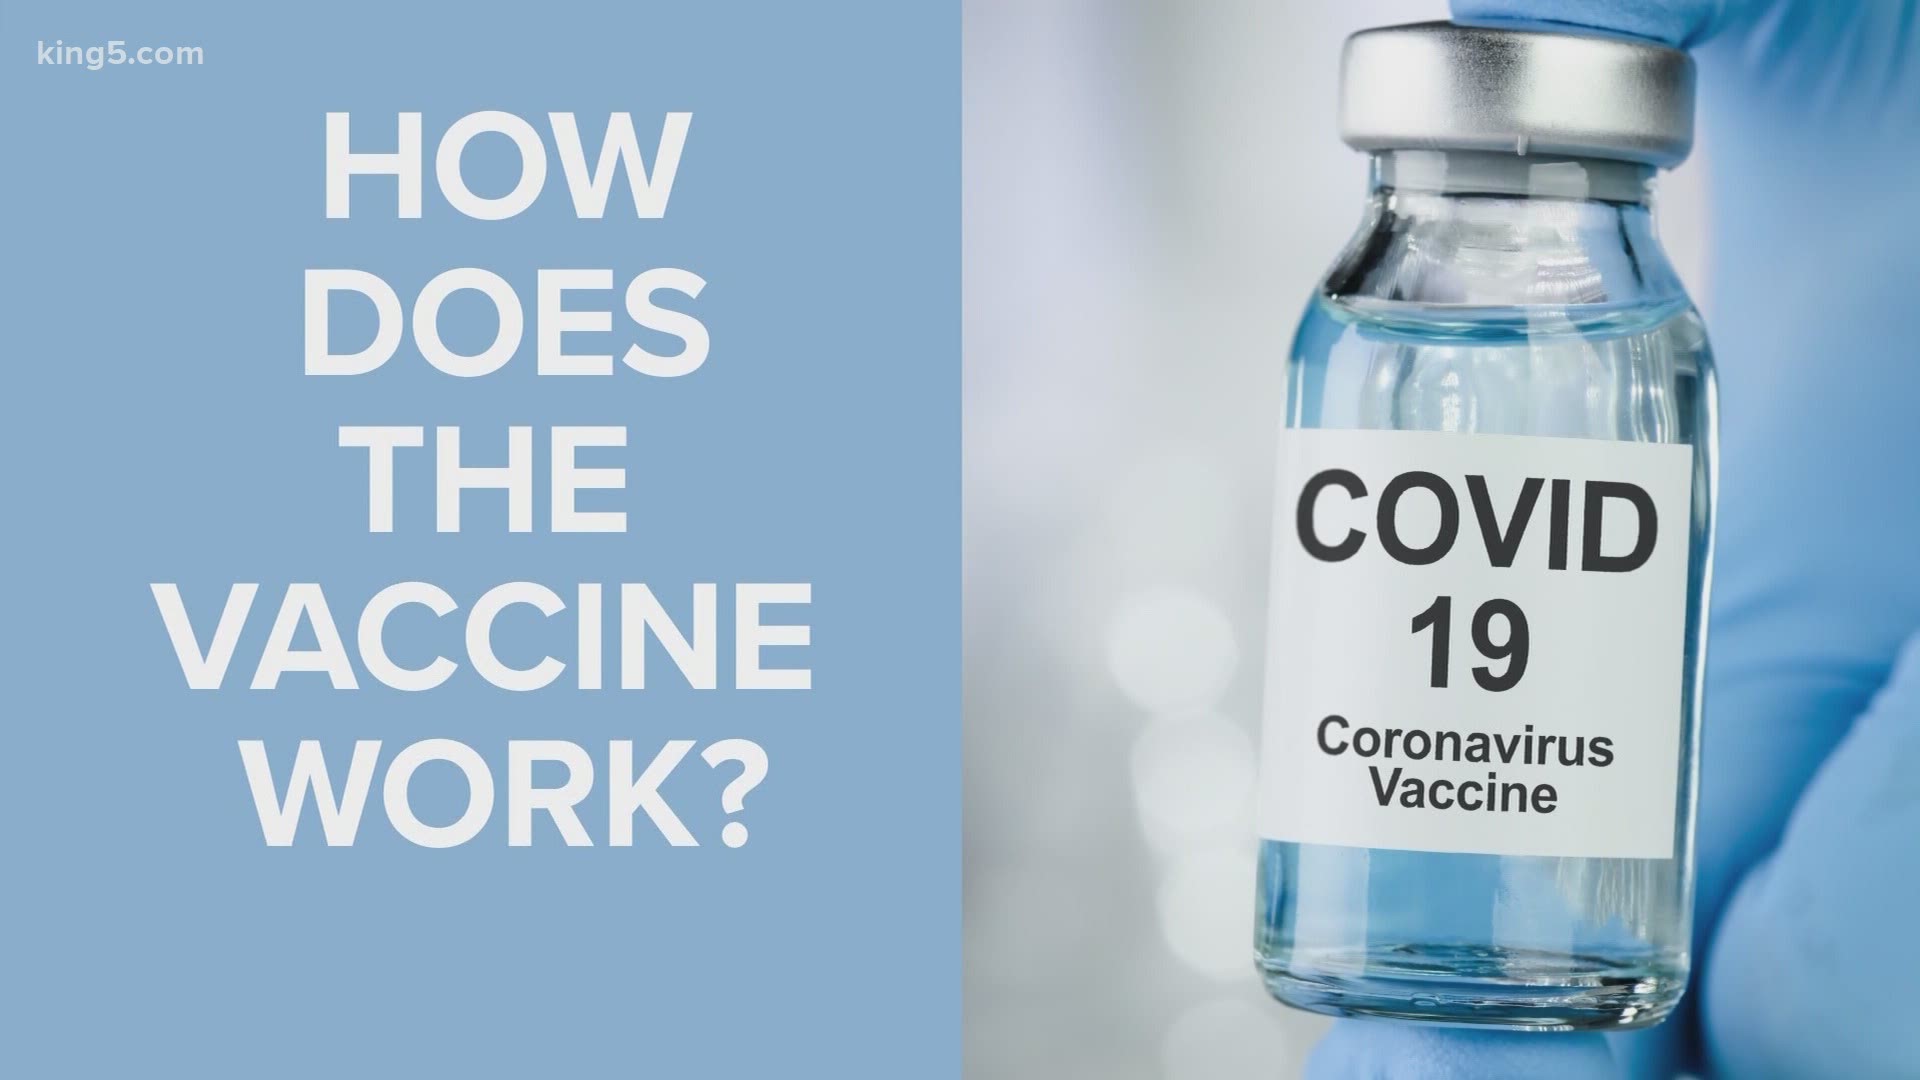 Over a dozen potential COVID-19 vaccines are in development around the world, and a few are now entering the final phase of human test trials. So, how does it work?